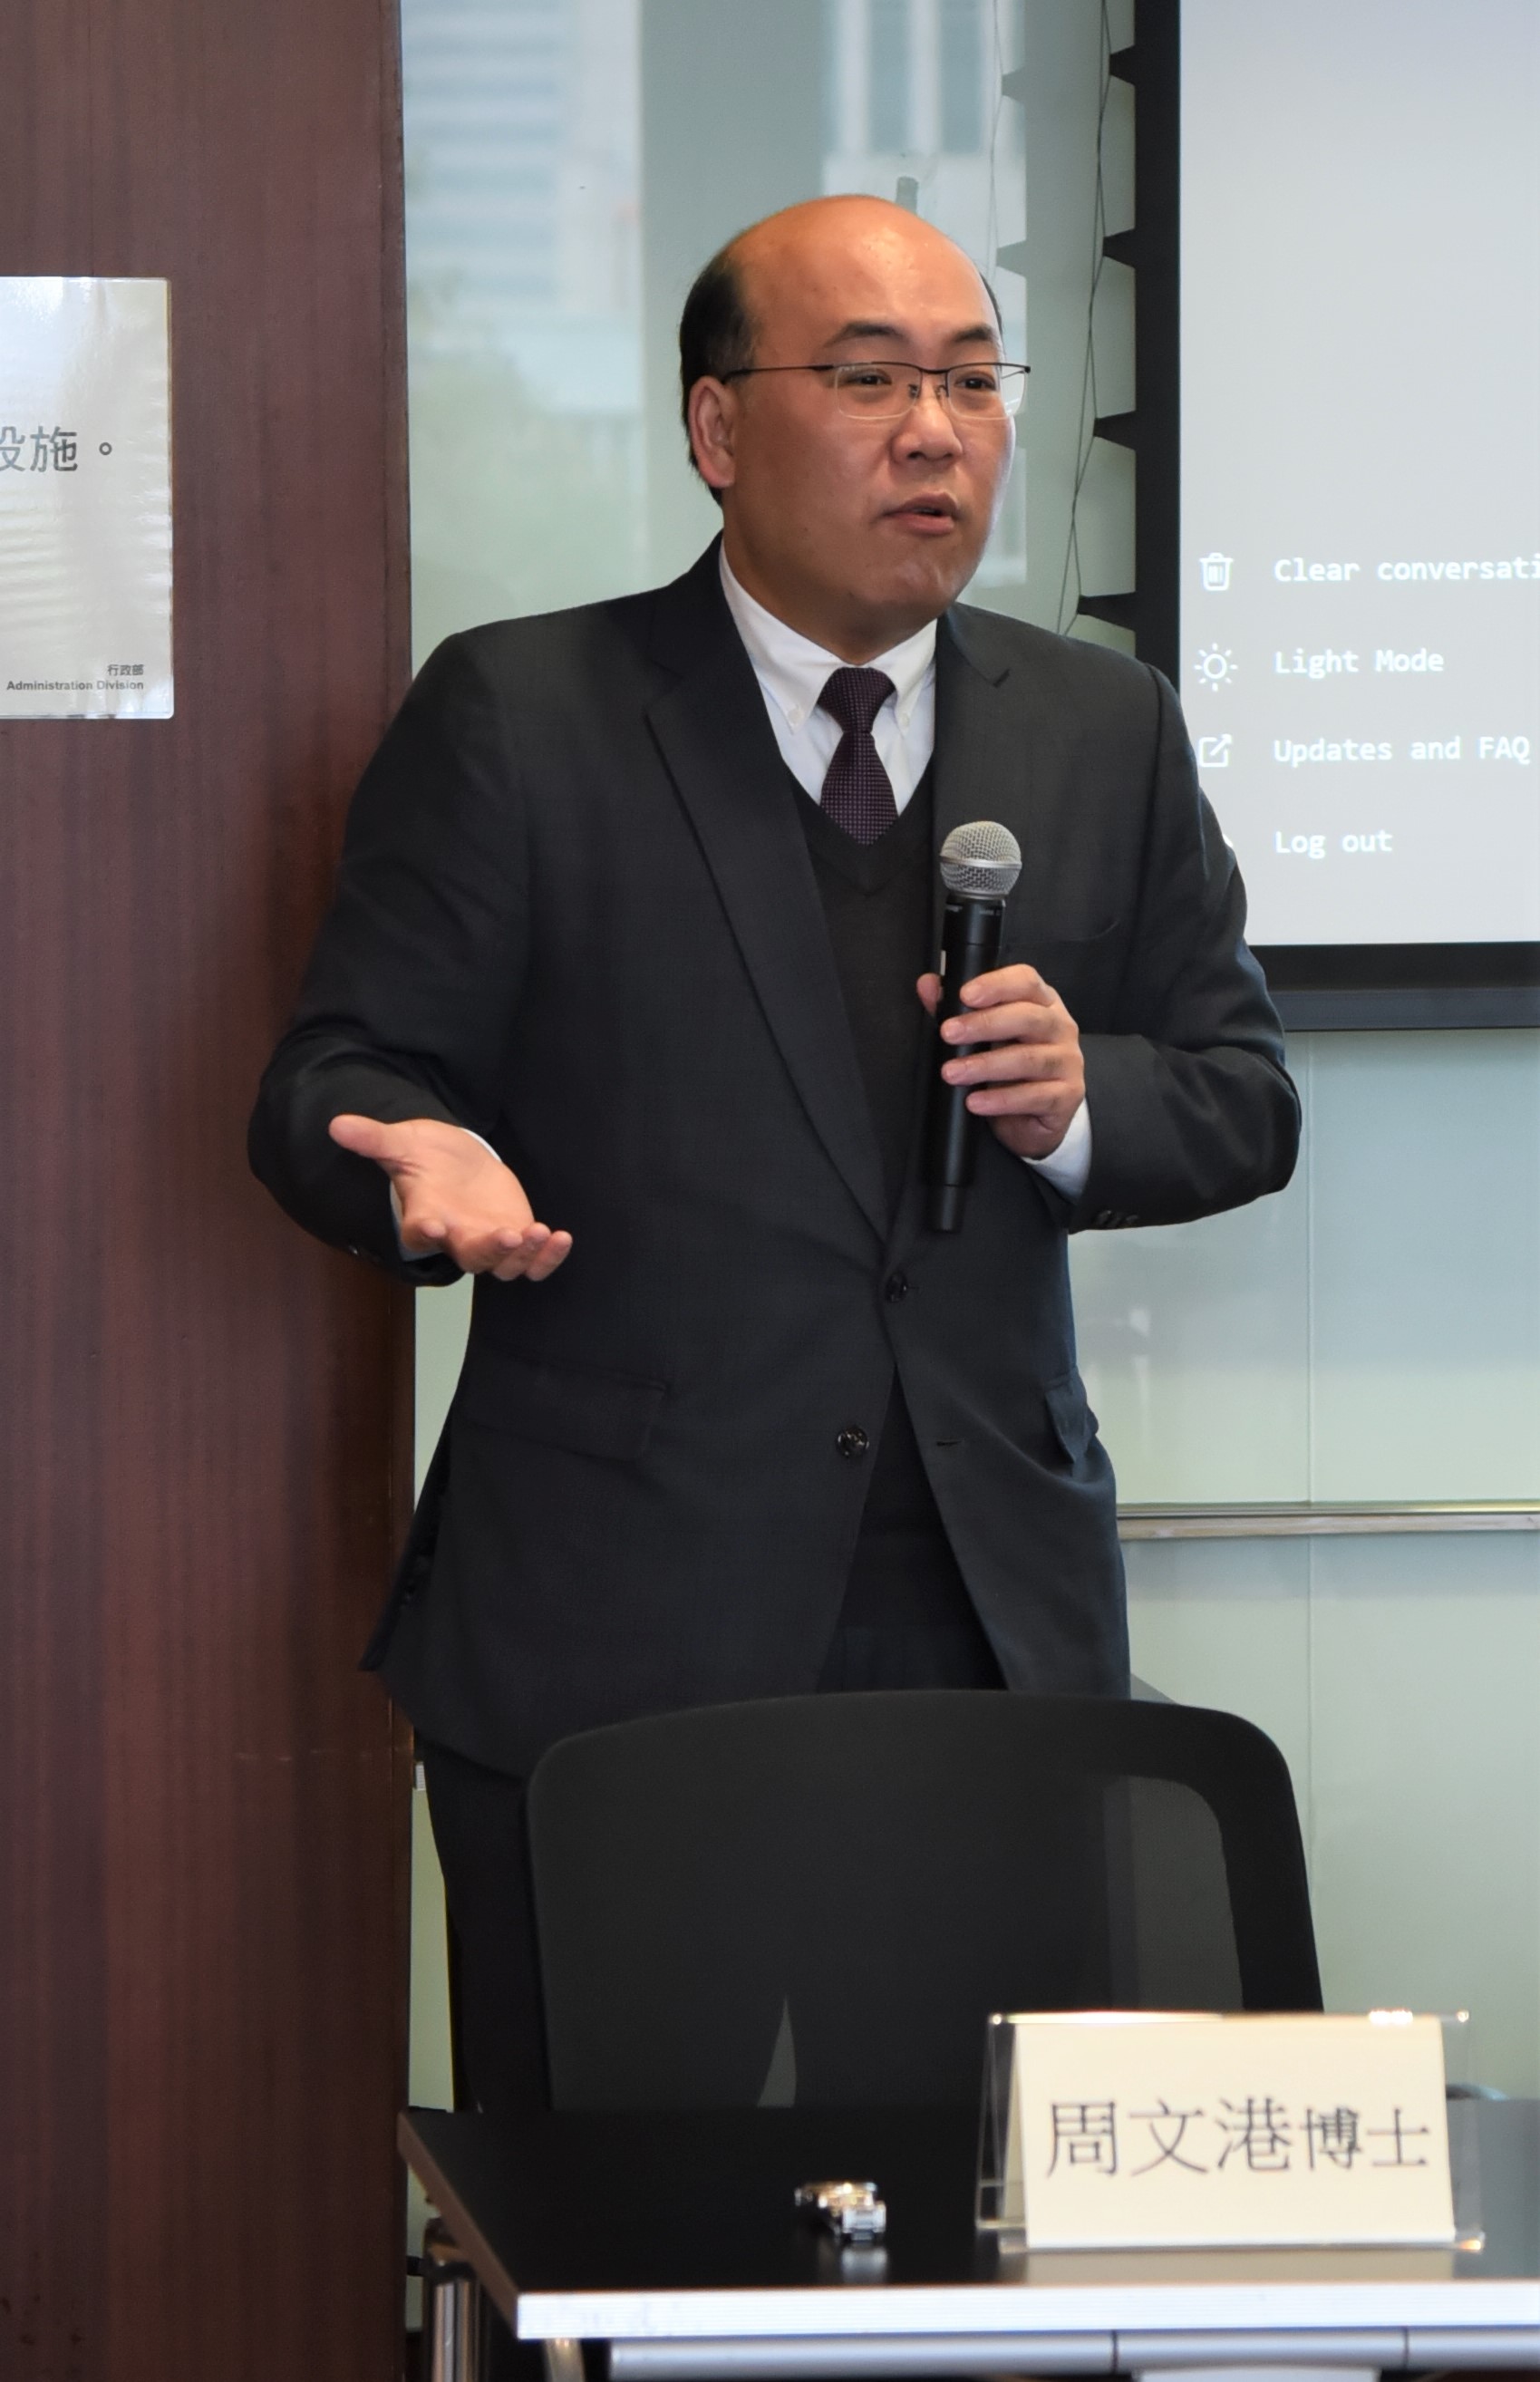 Dr. Chow Man Kong, Member of Legislative Council, the Director of the STEAM Education and Research Centre of Lingnan University